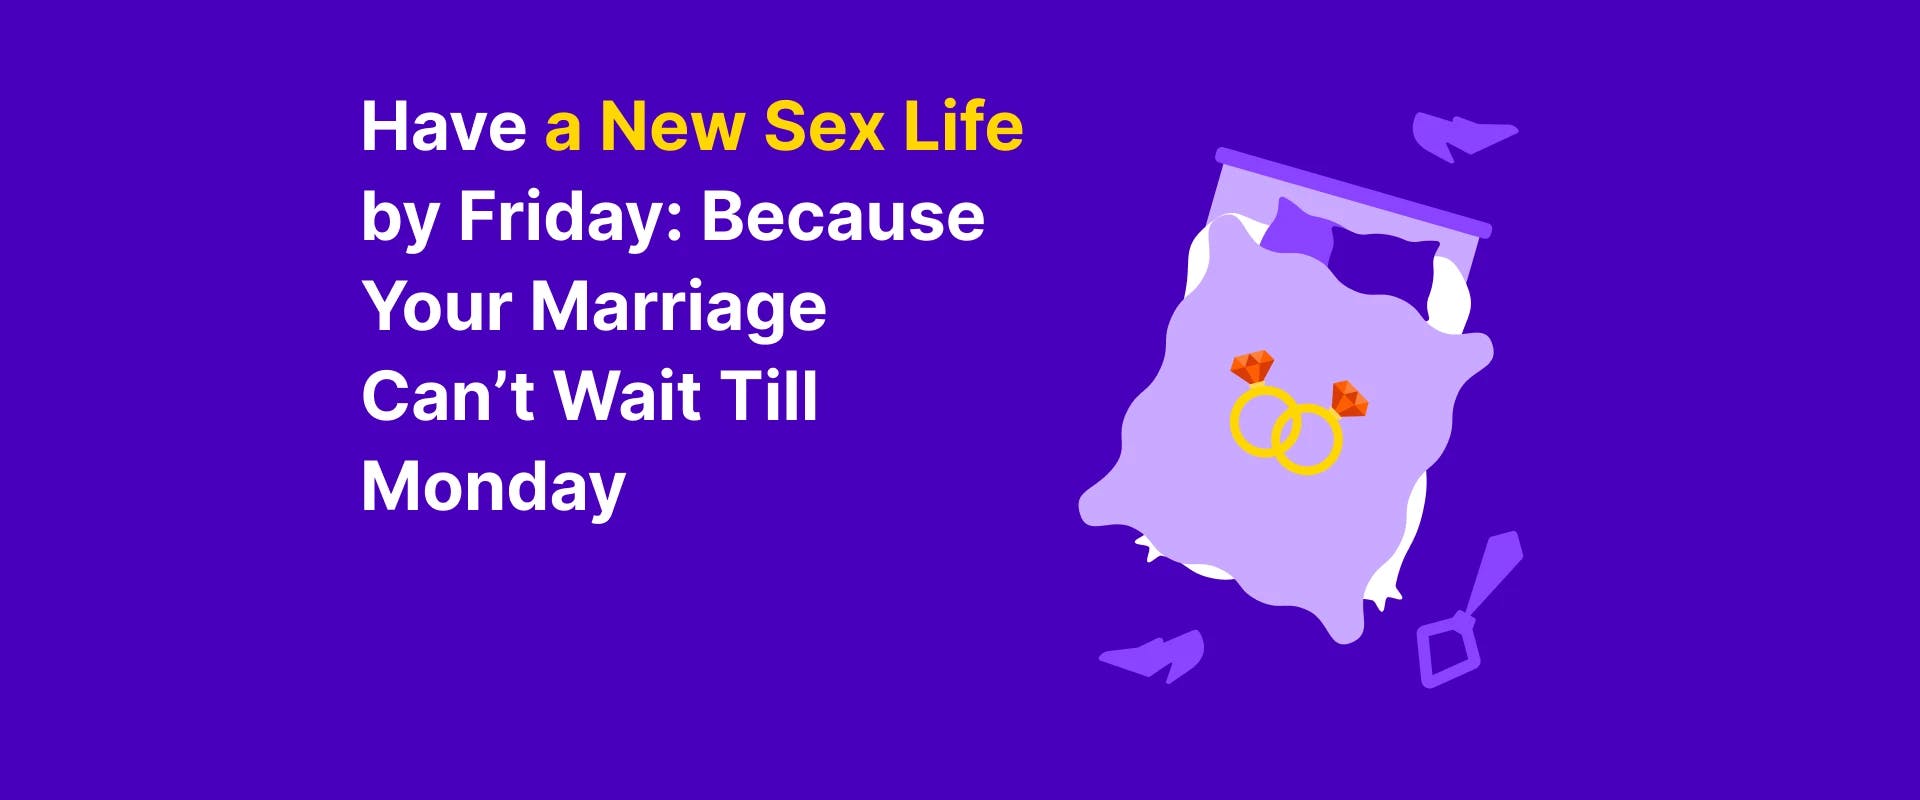 Have a New Sex Life by Friday: Because Your Marriage Can’t Wait Till Monday